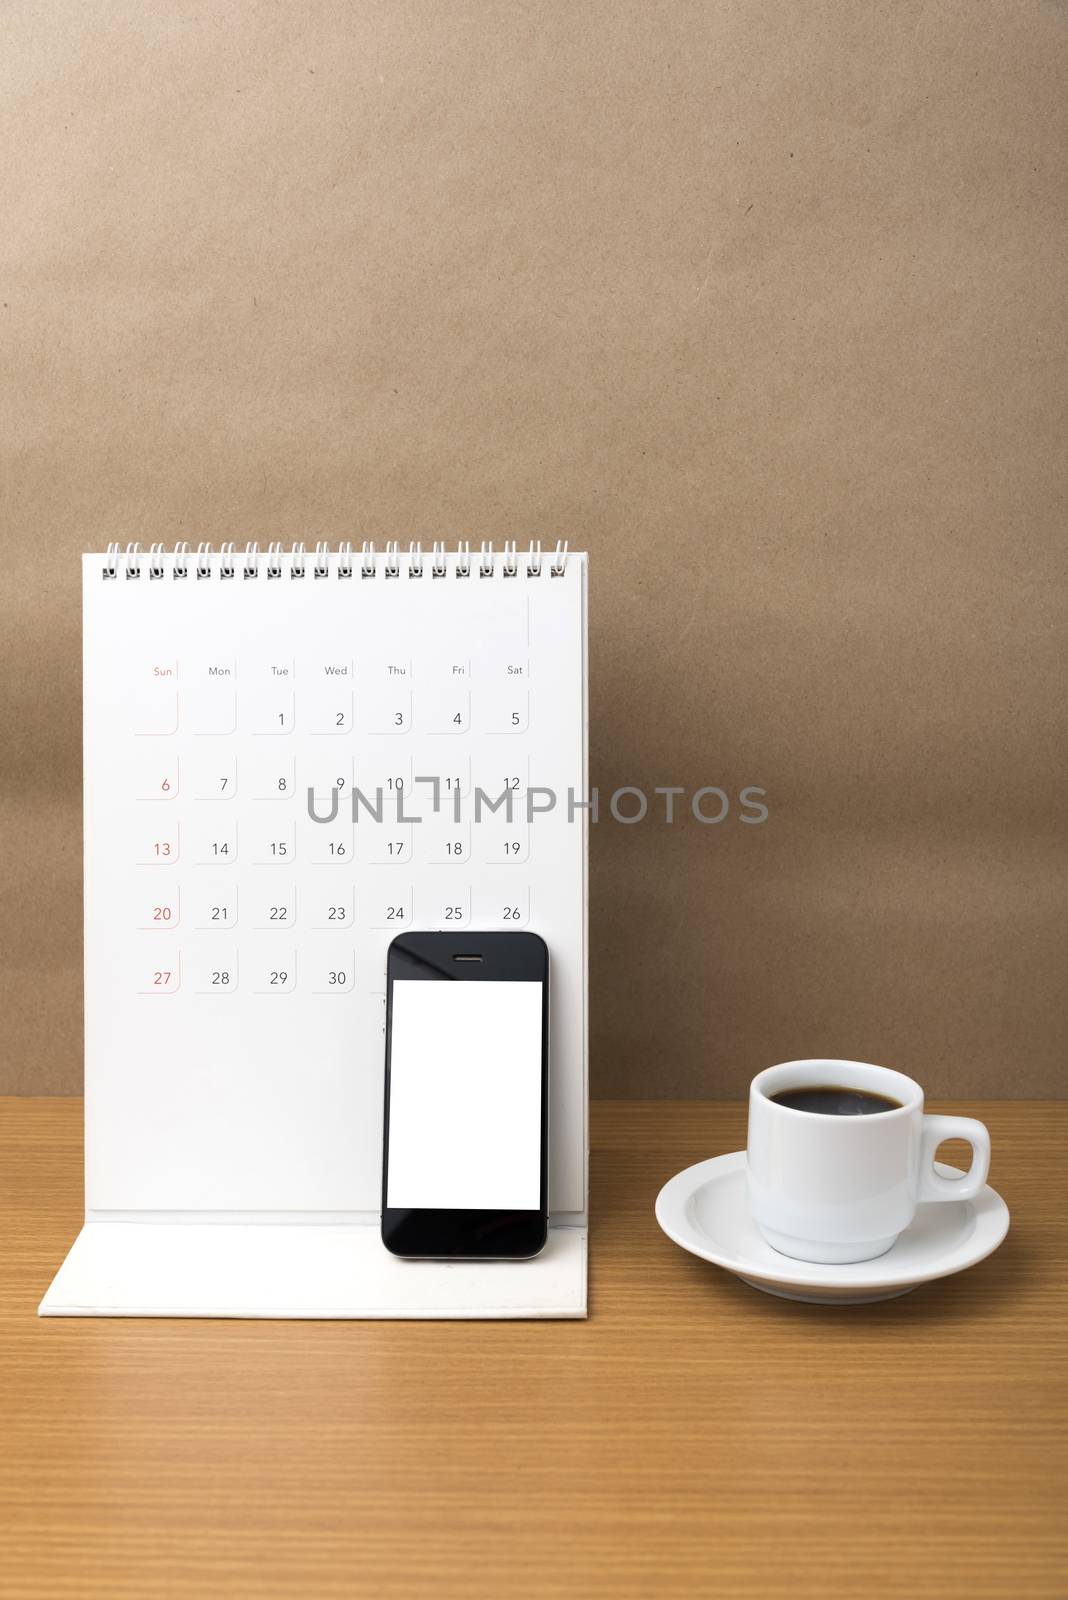 coffee cup and phone and calendar on wood background